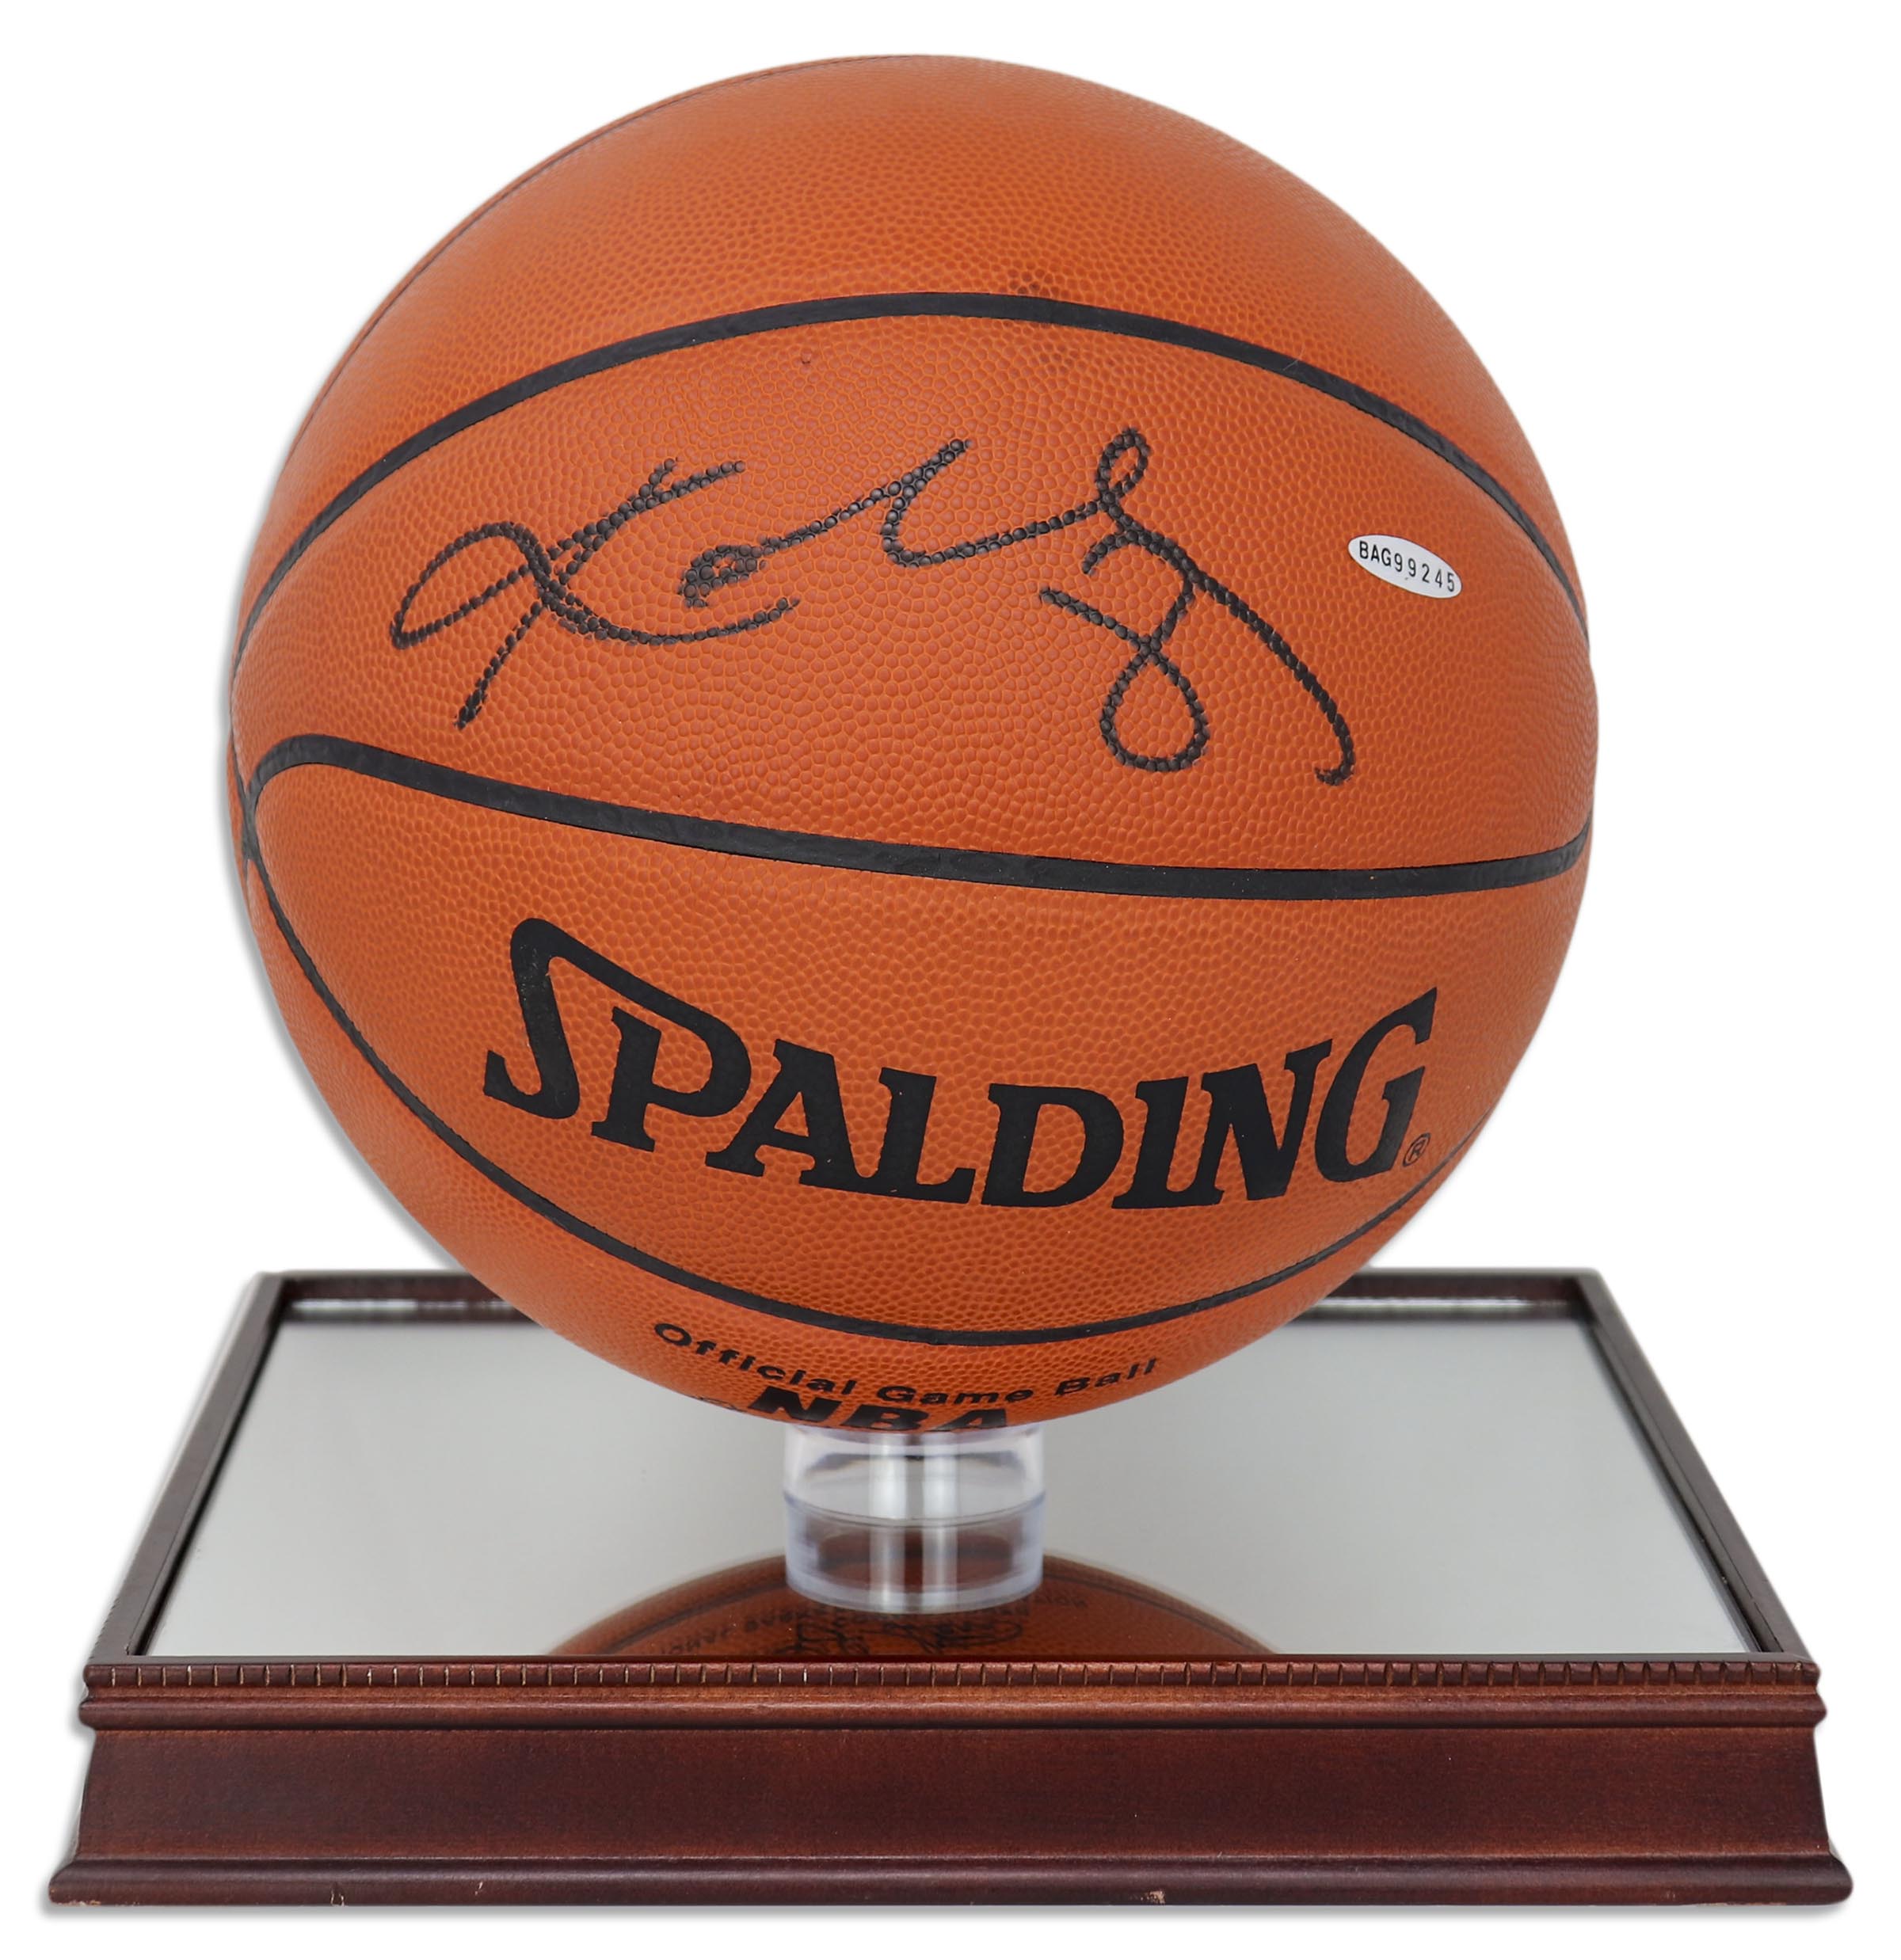 lakers signed basketball